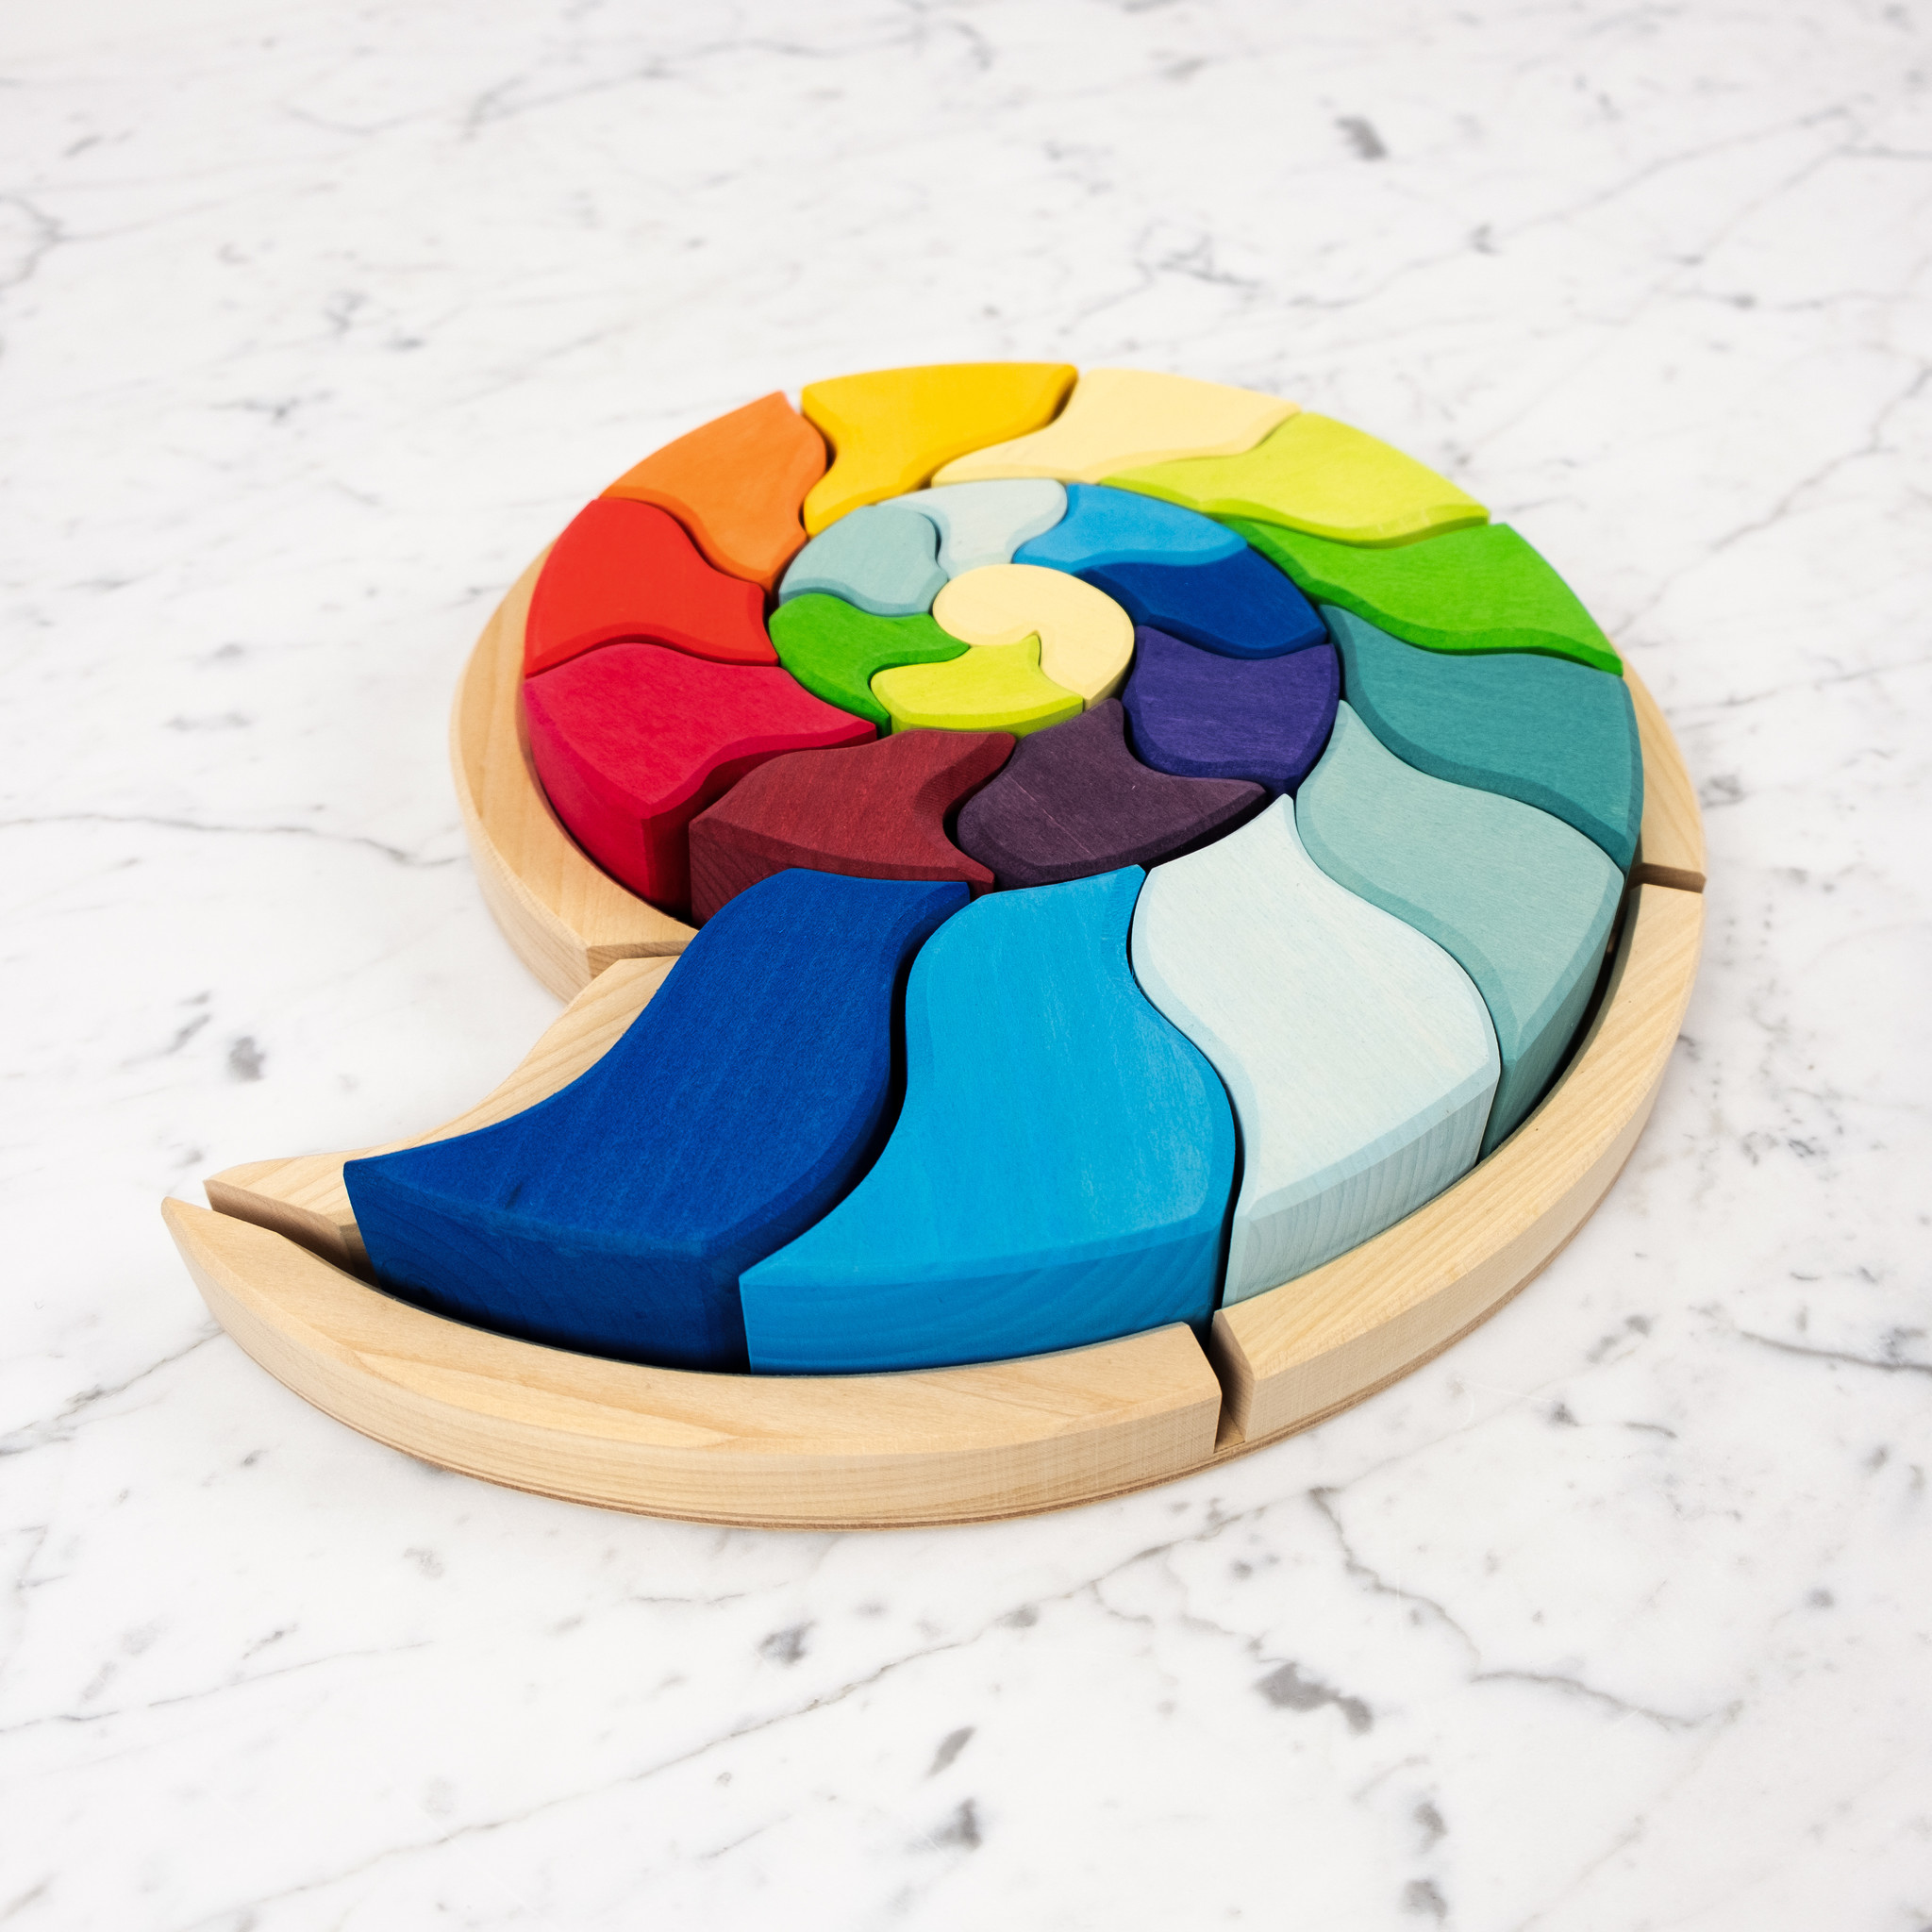 Grimm's Toys Rainbow Spiral Shell Puzzle